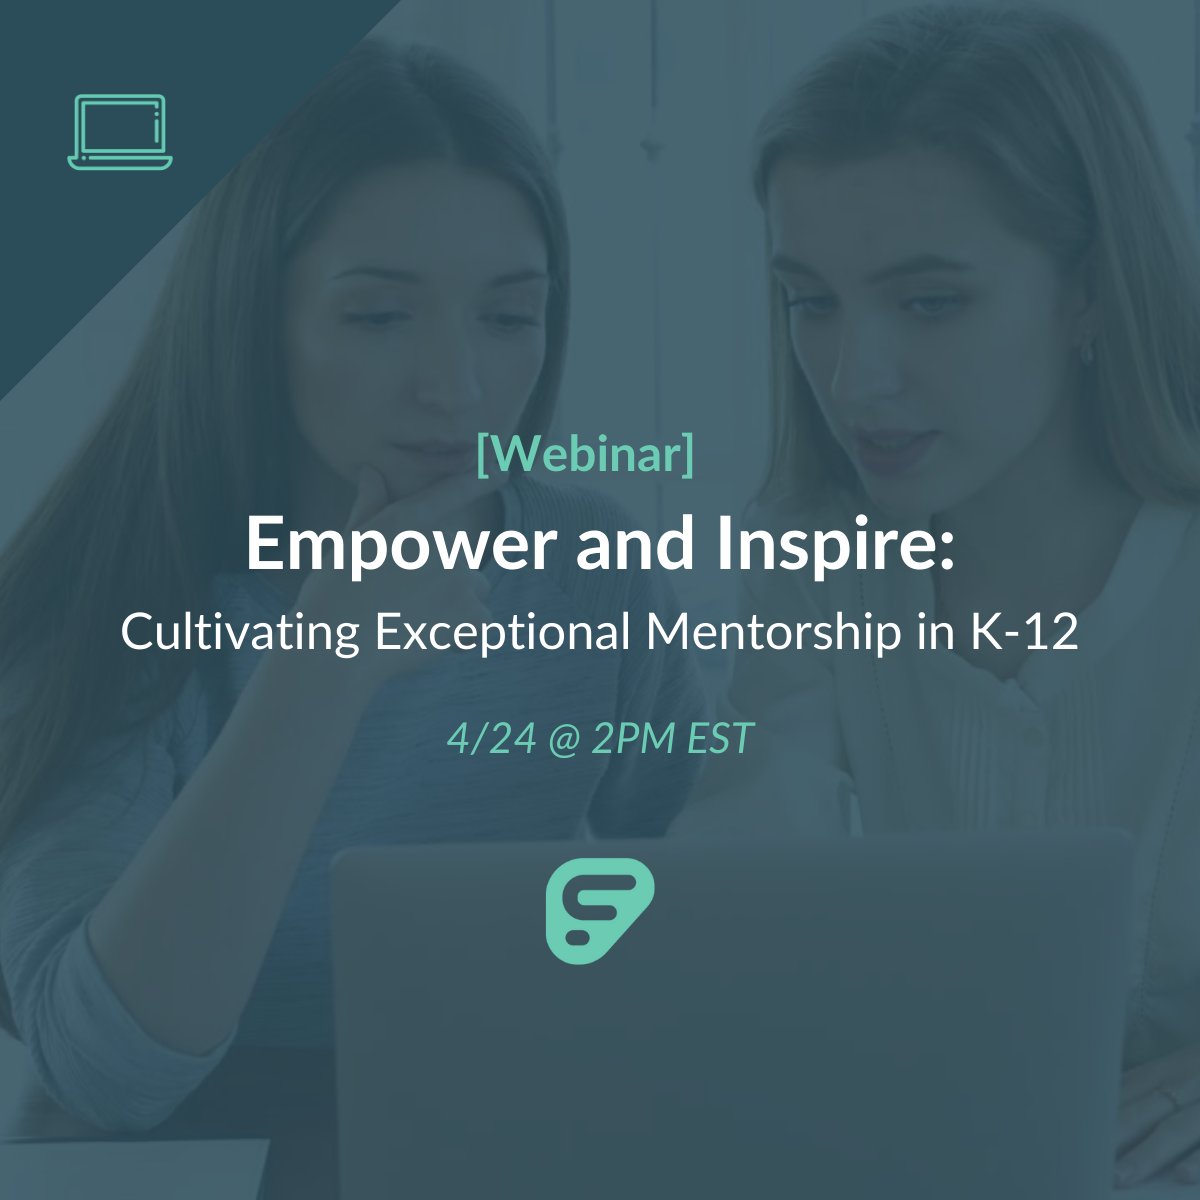 👏Join Frontline Education for an upcoming webinar on Cultivating Exceptional Mentorship in K-12🌟 🗓️ April 24th - Gain insights on transforming your school's mentorship culture for continuous learning and empowerment. Save your spot 👉 ow.ly/zVOJ50RjZ6L #EdTech #K12